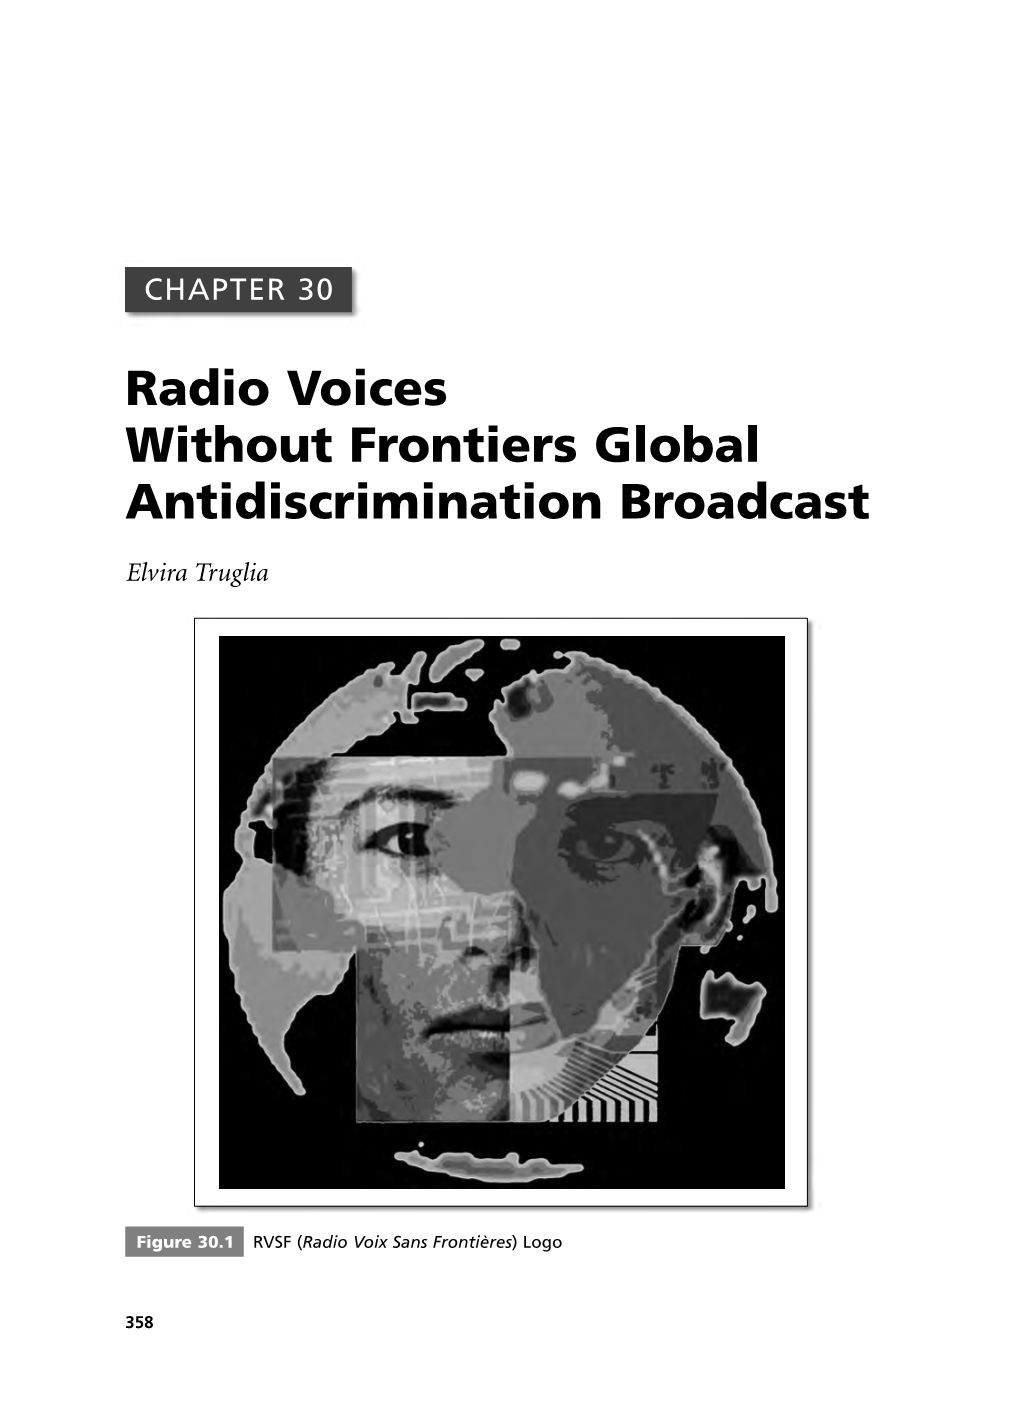 Radio Voices Without Frontiers Global Antidiscrimination Broadcast